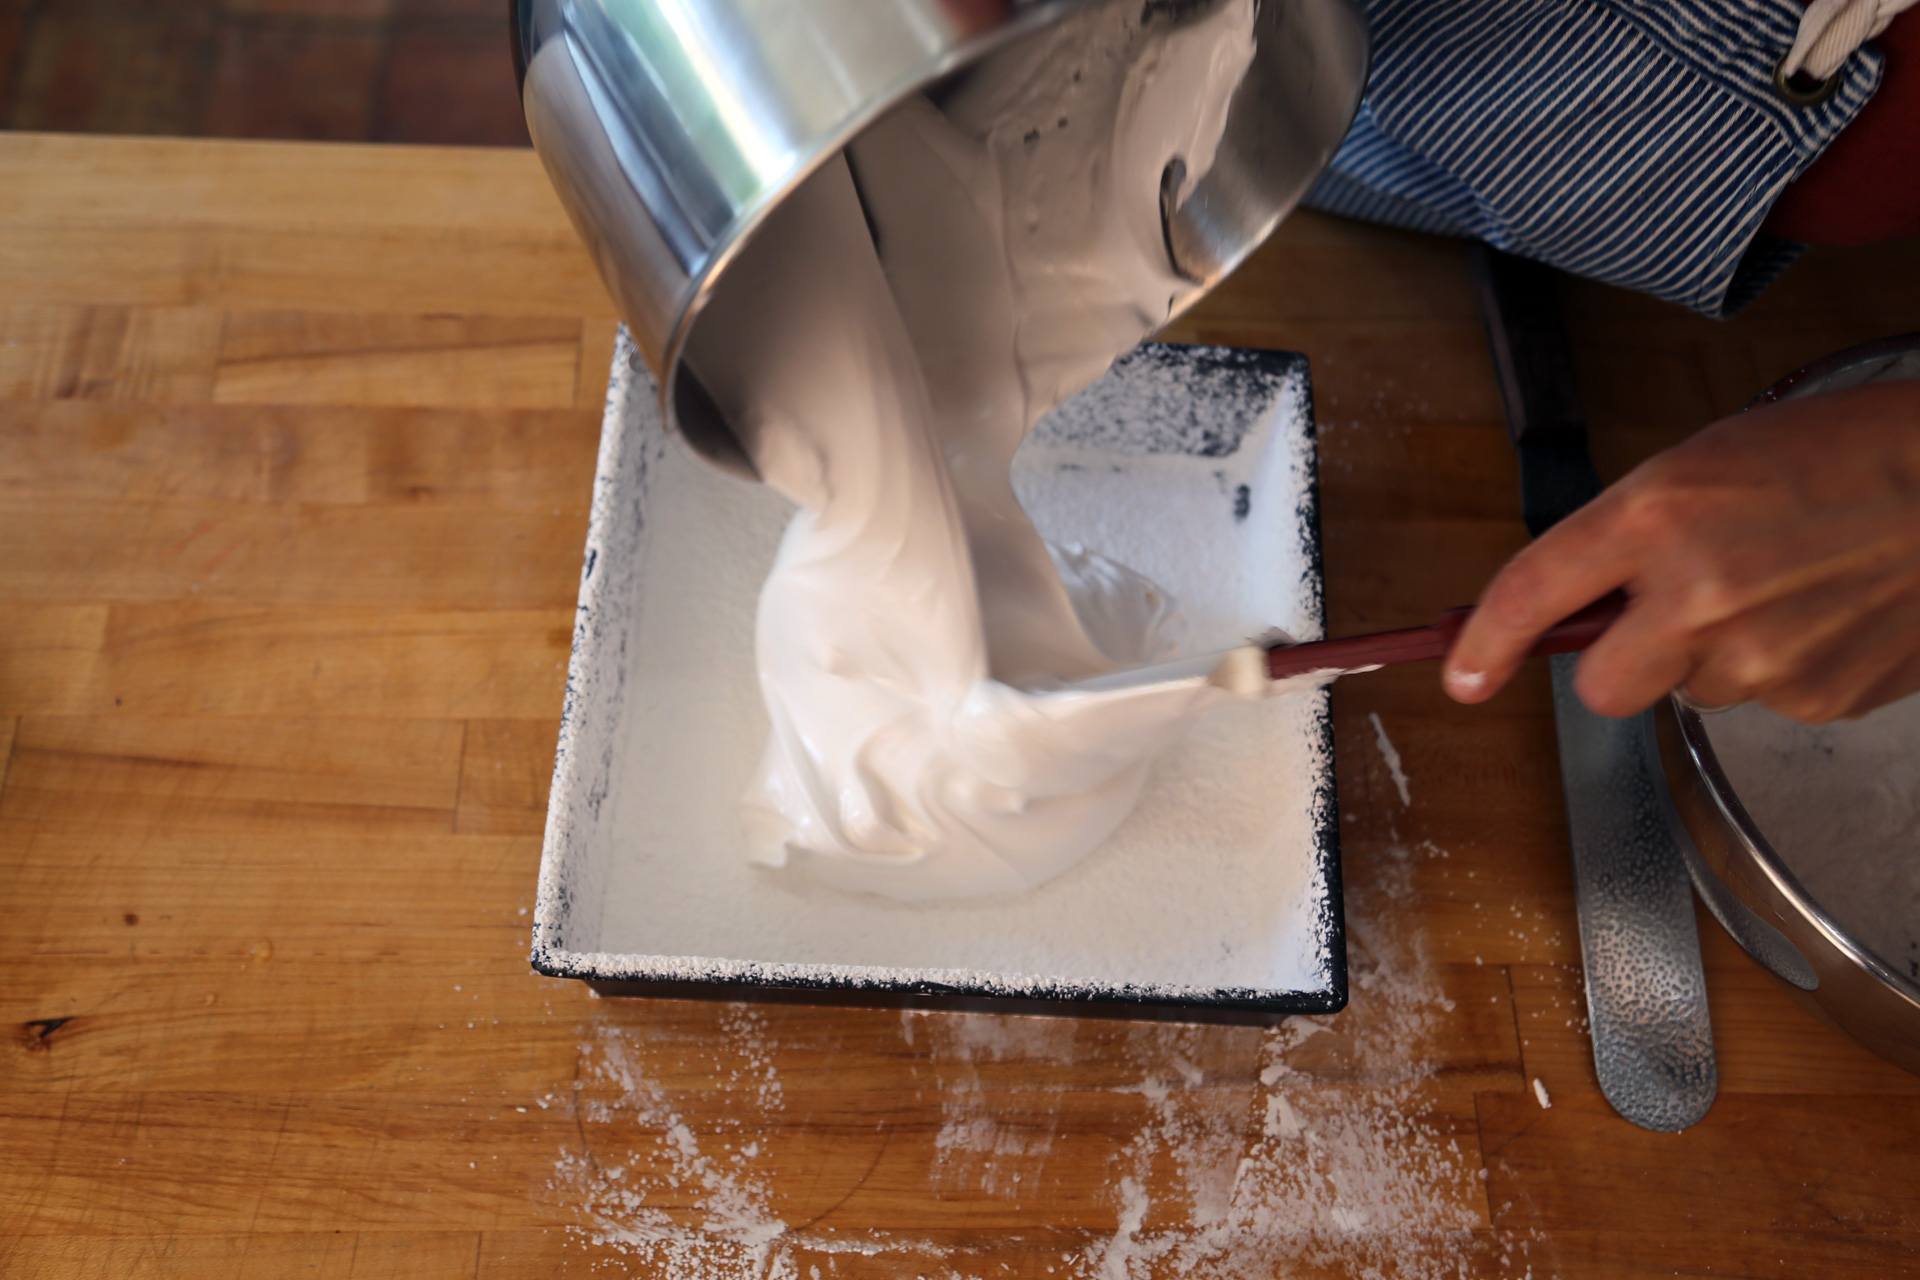 Using a rubber spatula, quickly scrape the marshmallow mixture into the coated pan.